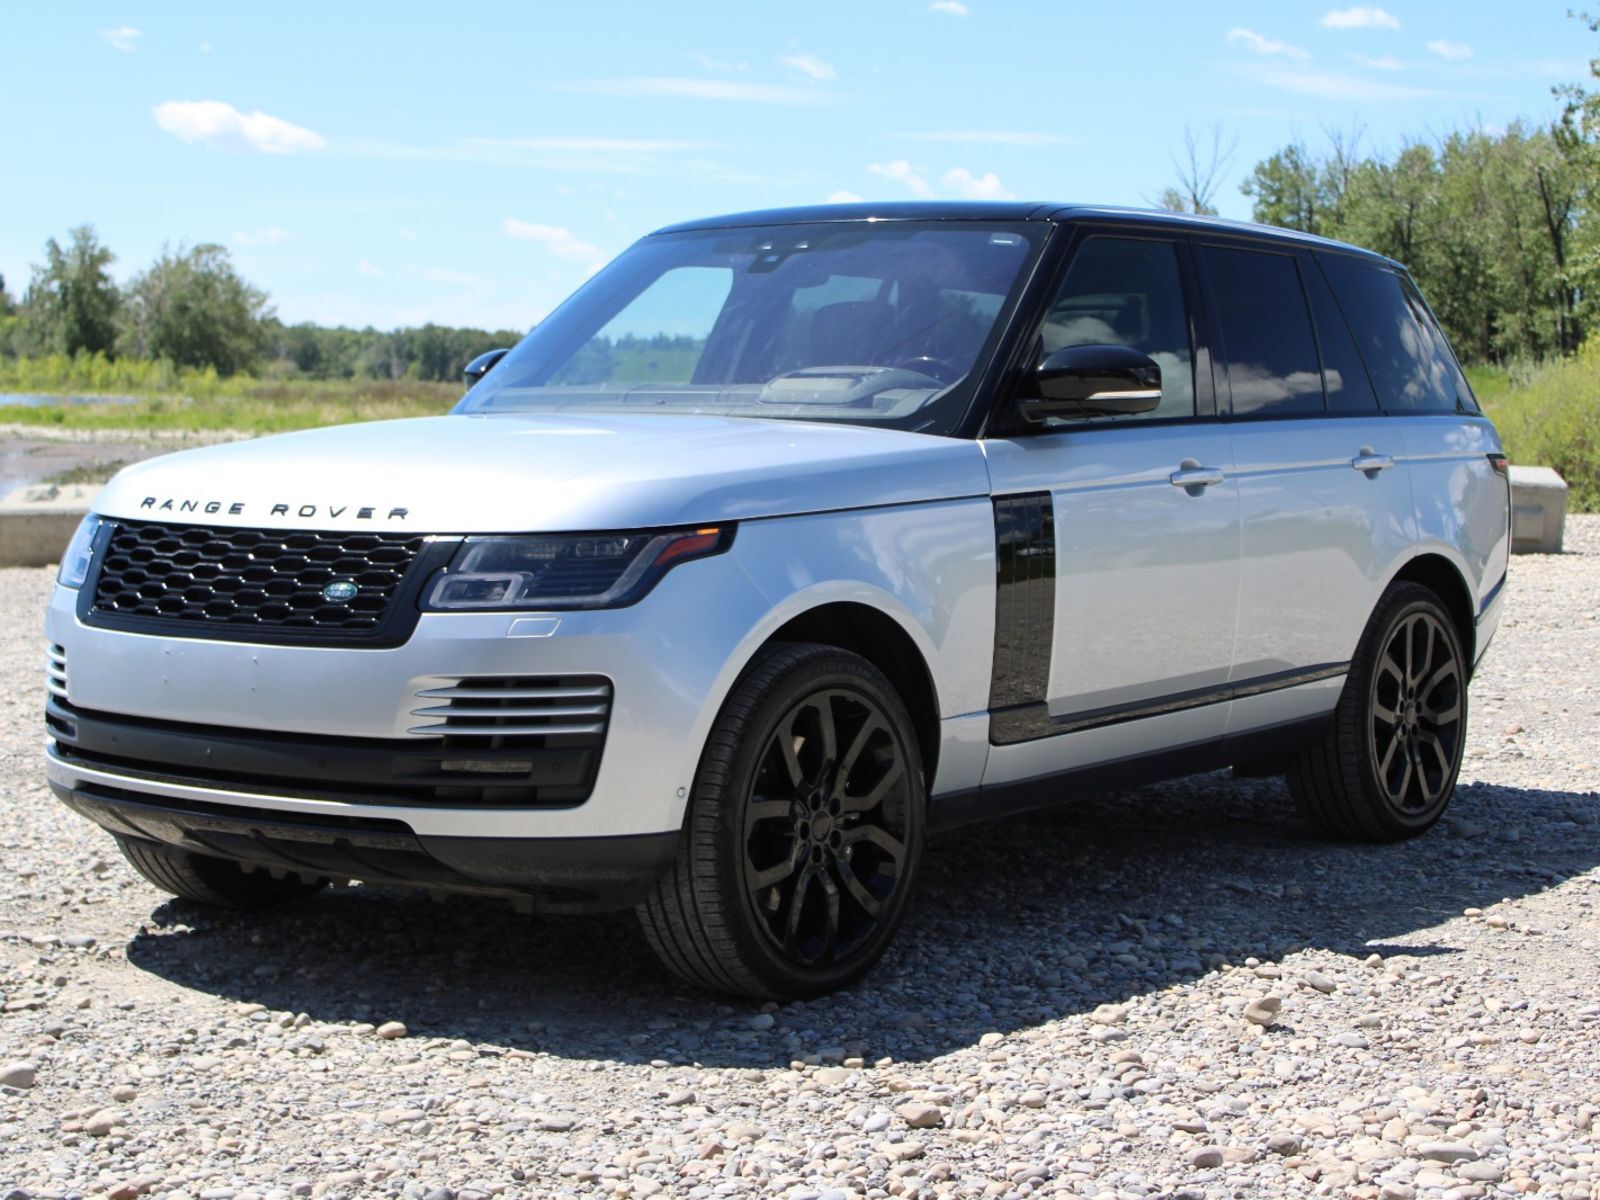 2019 Land Rover Range Rover NEW FRONT/REAR BRAKES, NEW TIRES & UP TO DATE SERV